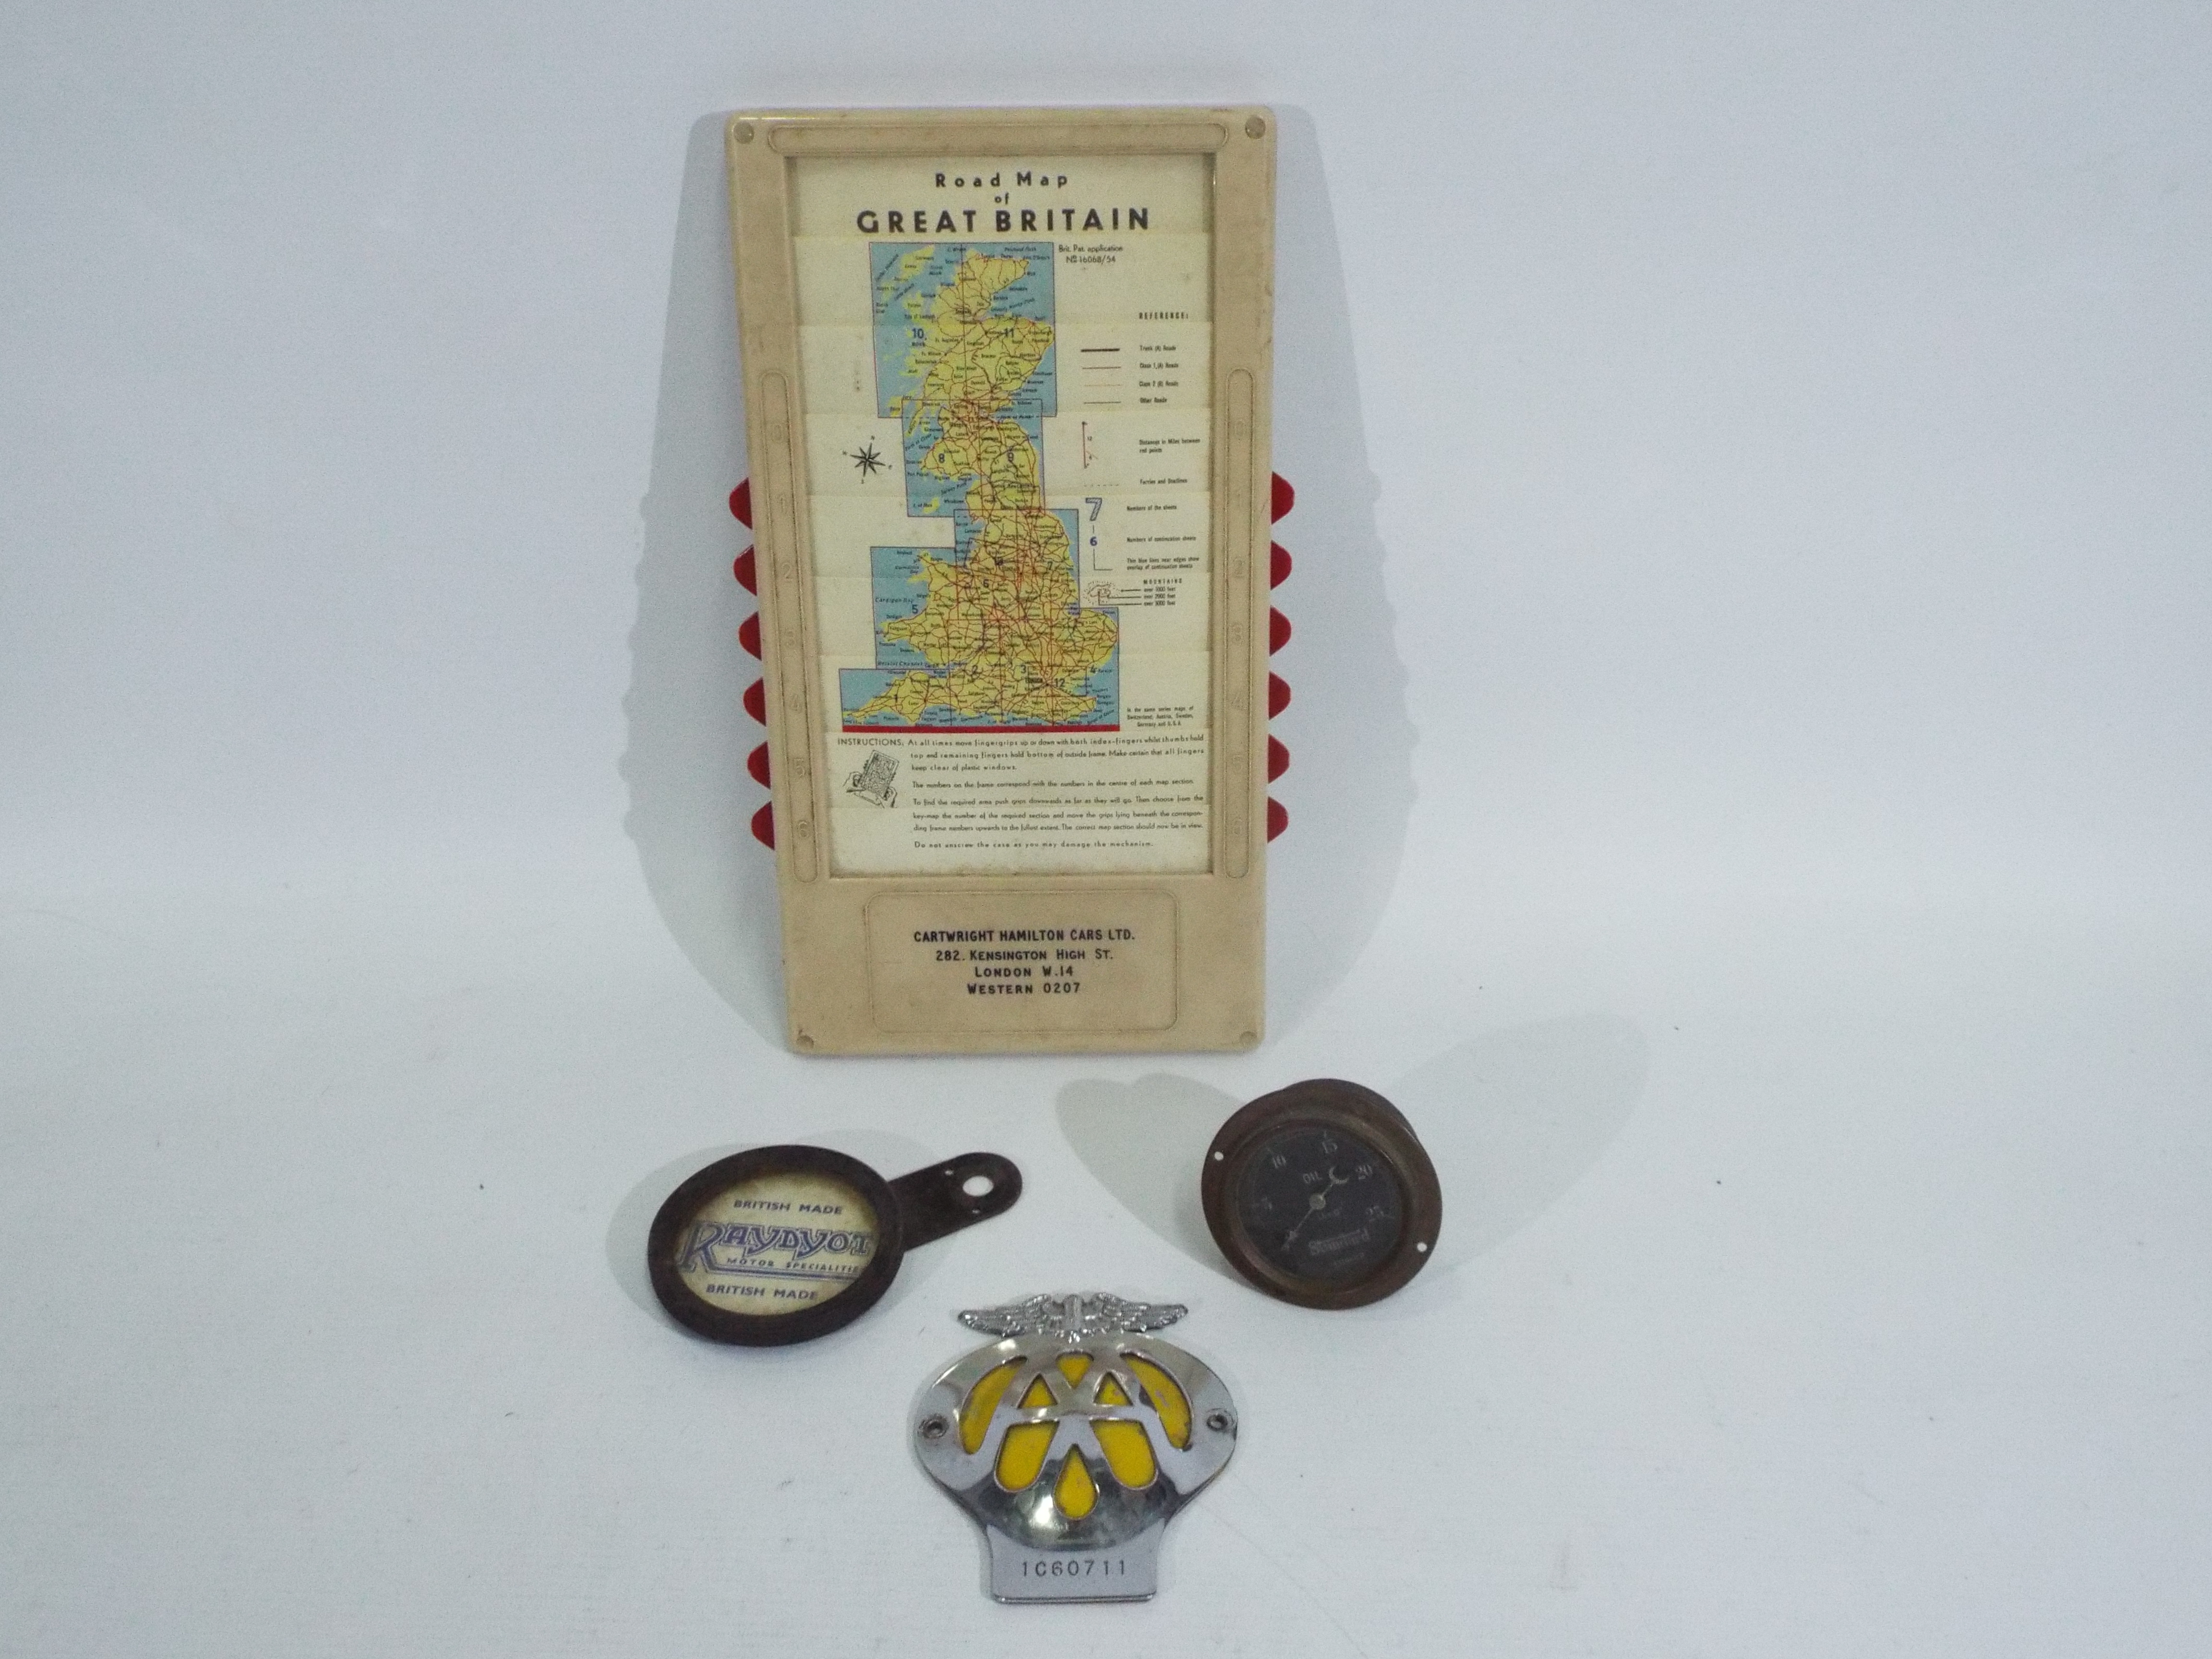 Automobilia - A vintage Auto Mapic type Road Map of Great Britain, AA badge, - Image 2 of 9